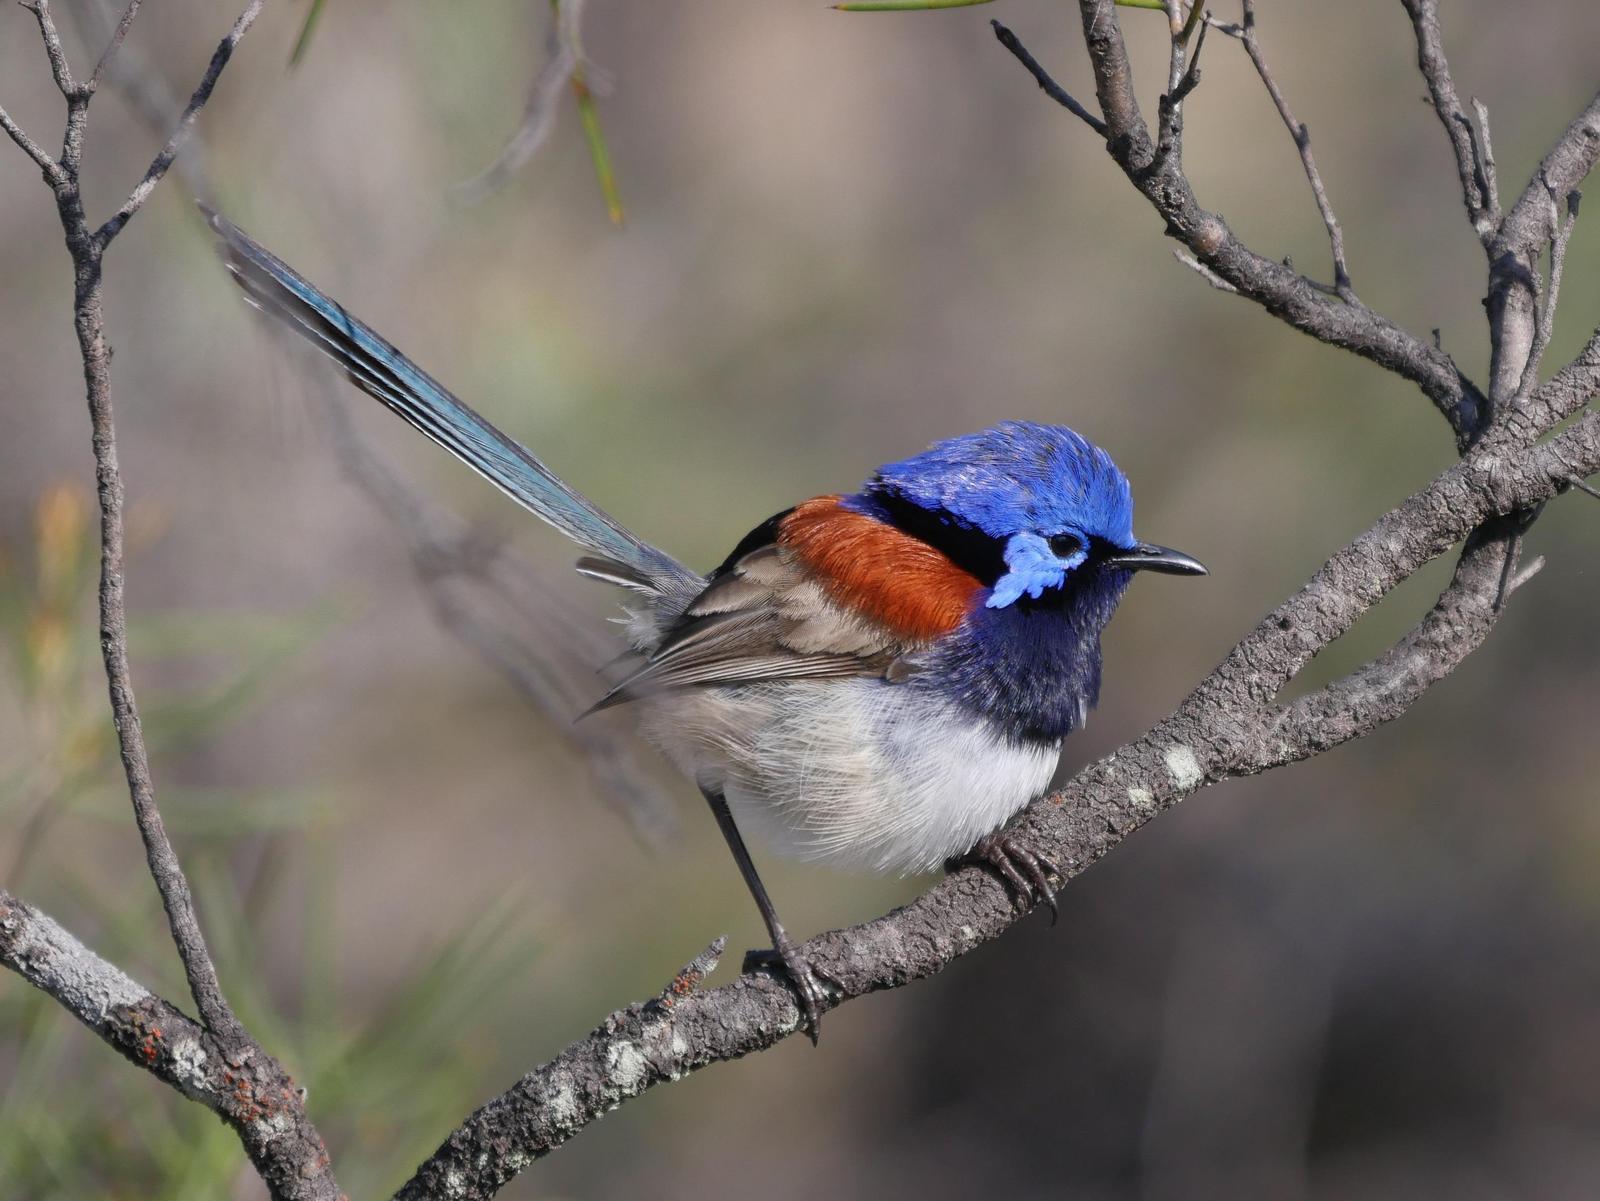 Blue-breasted Fairywren Photo by Peter Lowe